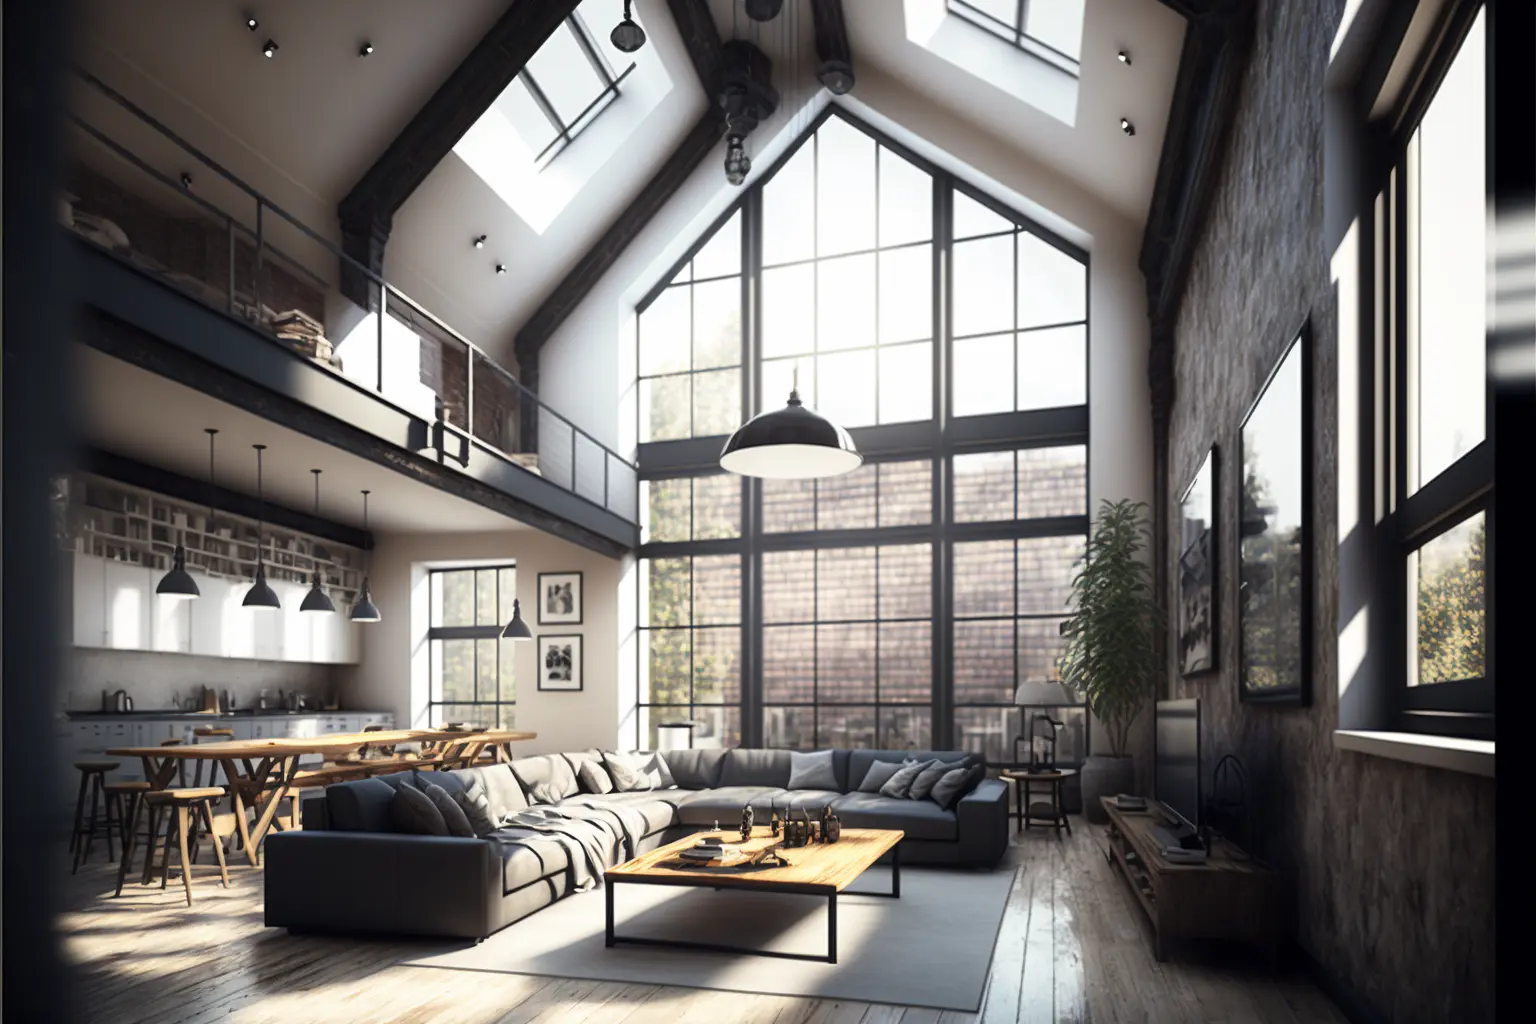 Interior Design, a perspective of a creative loft, large windows with natural light, industrial ceiling, modern furniture, skylight, modern minimalistic design